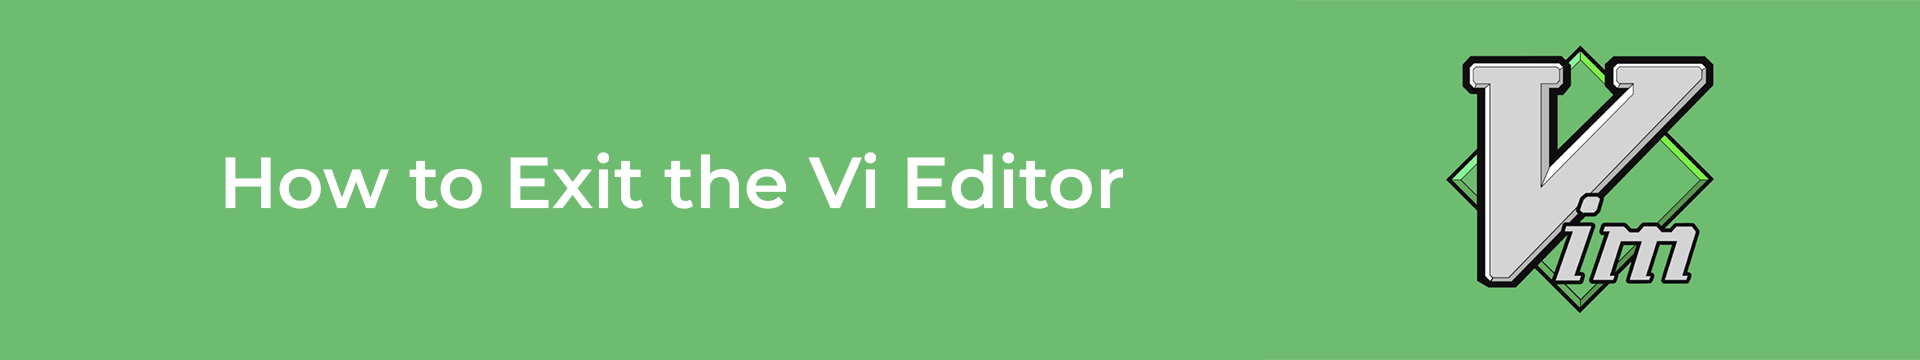 How to Exit the Vi Editor and Save Your Work